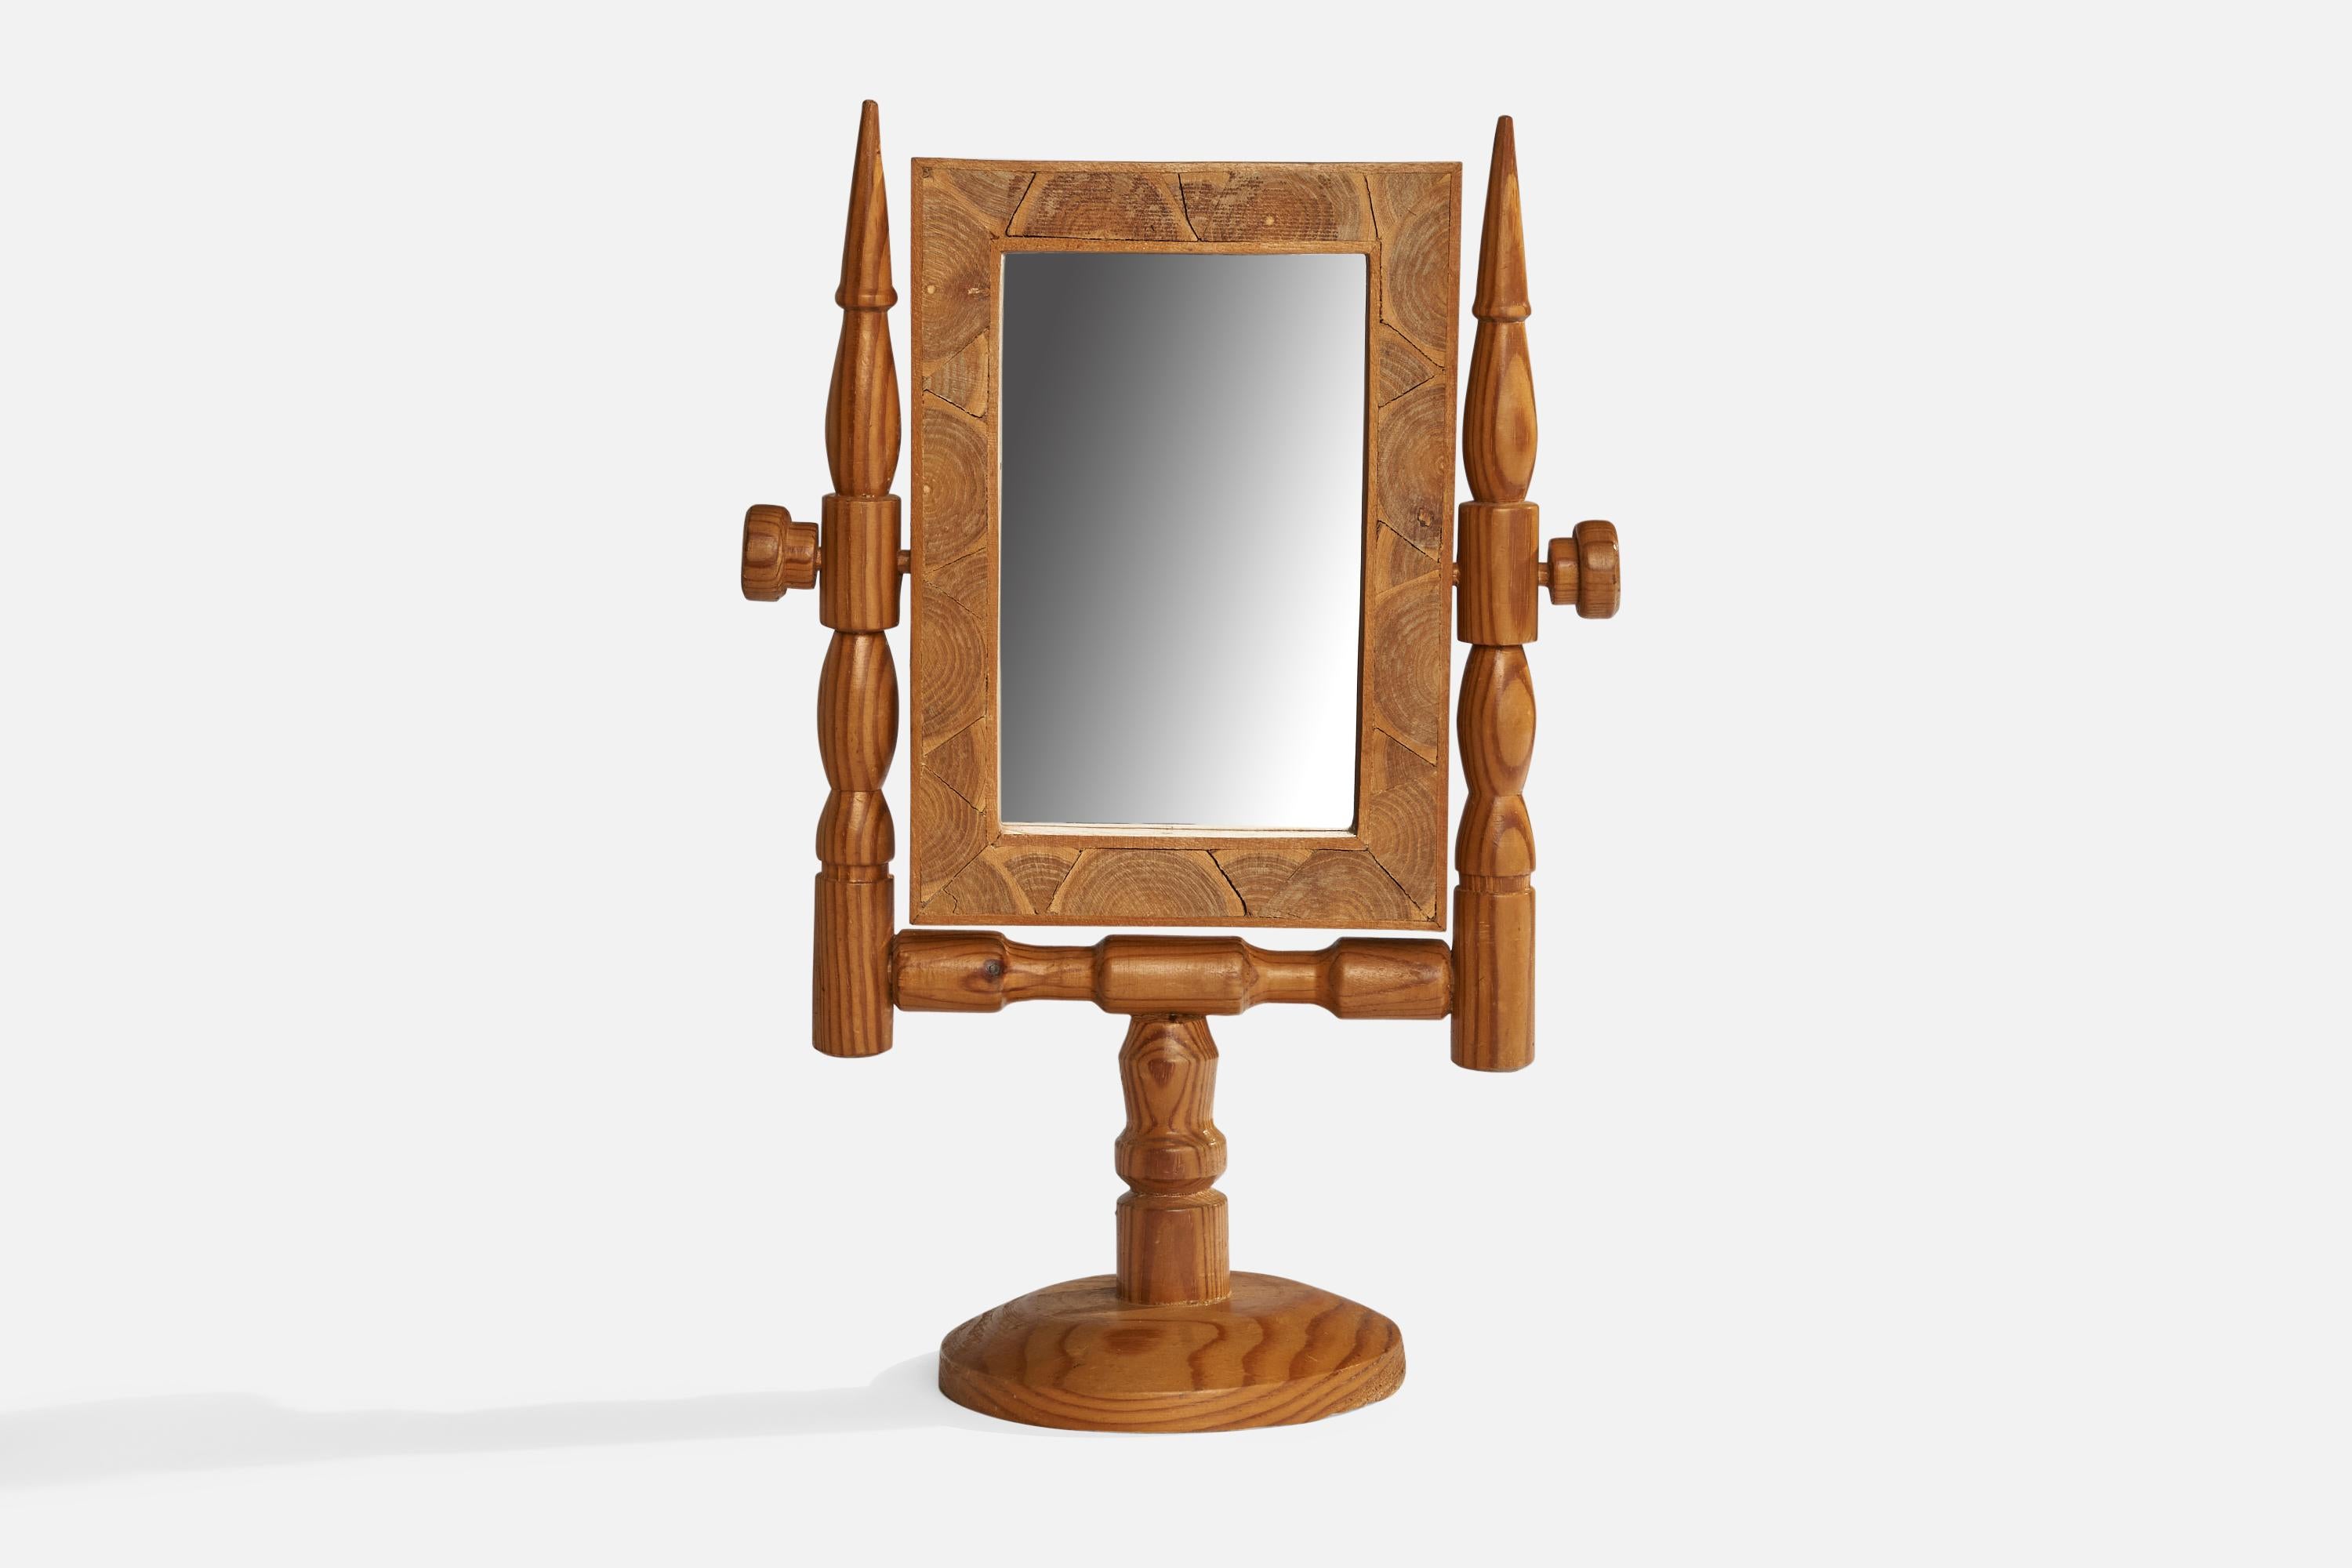 An adjustable pine and spalting table mirror designed and produced in Sweden, c. 1960s.